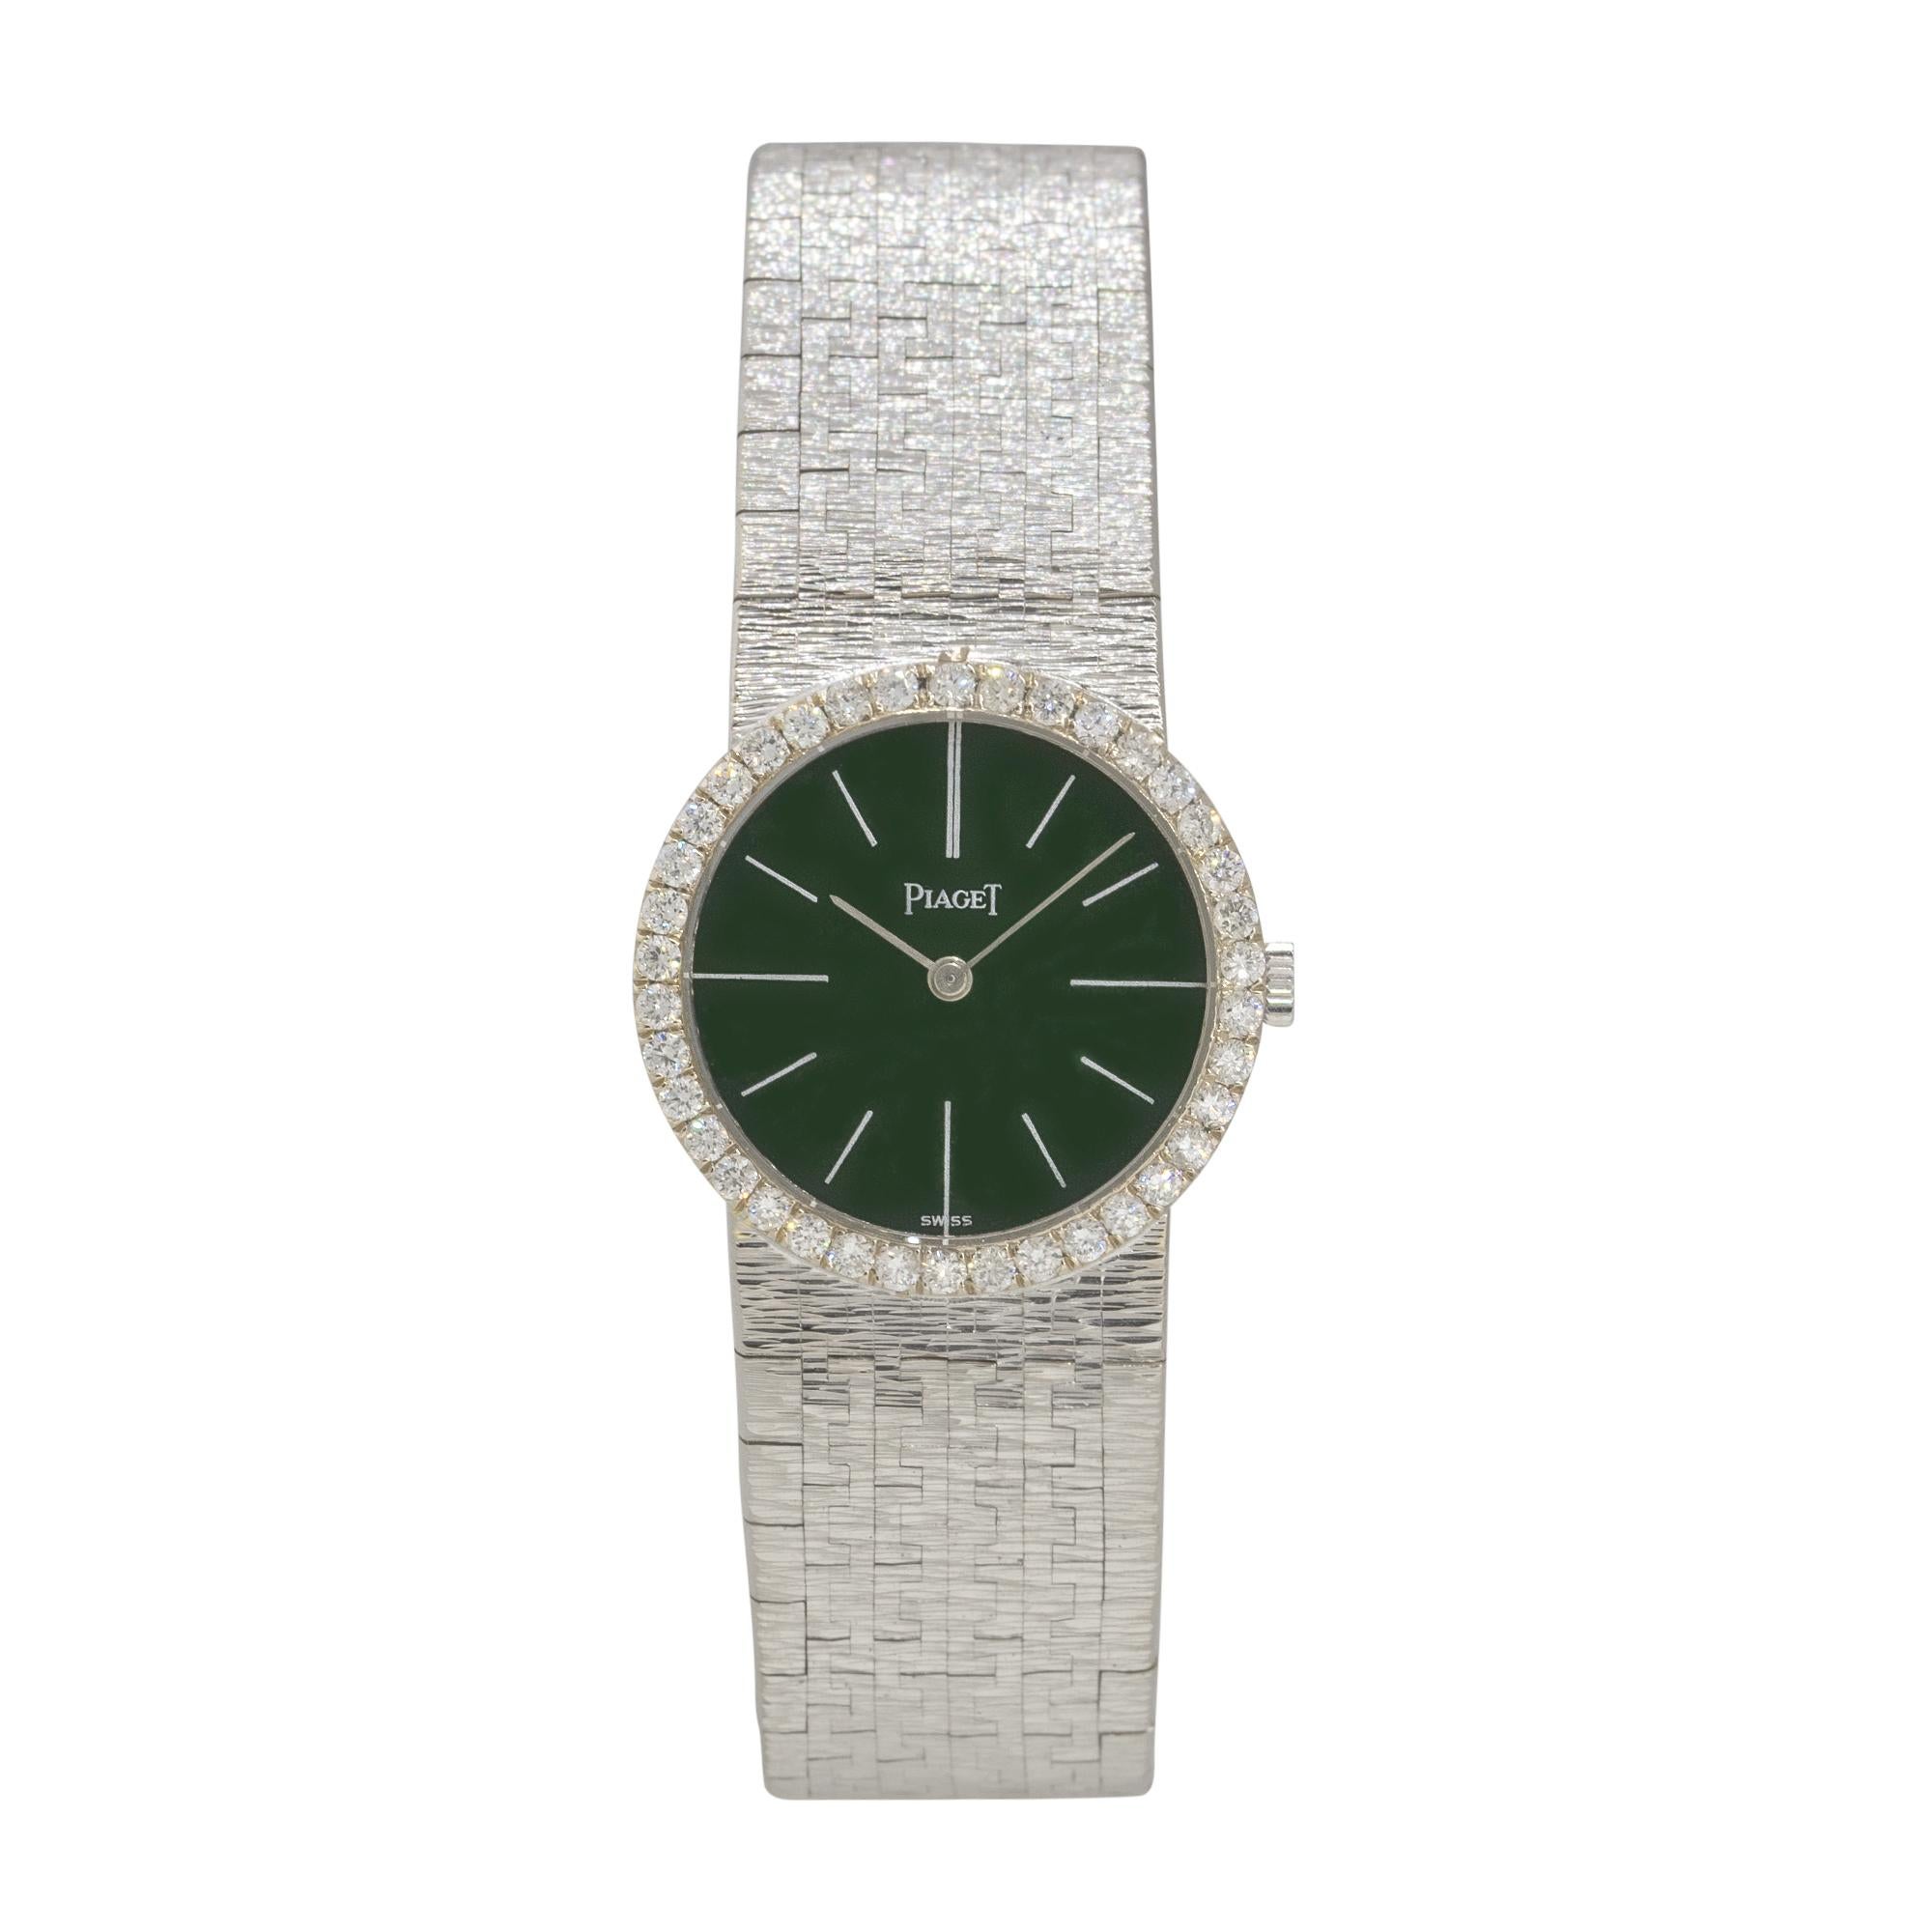 Brand: Piaget
Case Material: 18k White Gold
Case Diameter: 24mm
Crystal: Sapphire Crystal
Bezel: 18k White Gold Diamond Bezel
Dial: Green Jade dial with silver hands and hour markers
Bracelet: 18k White Gold
Size: Will fit a 6.5